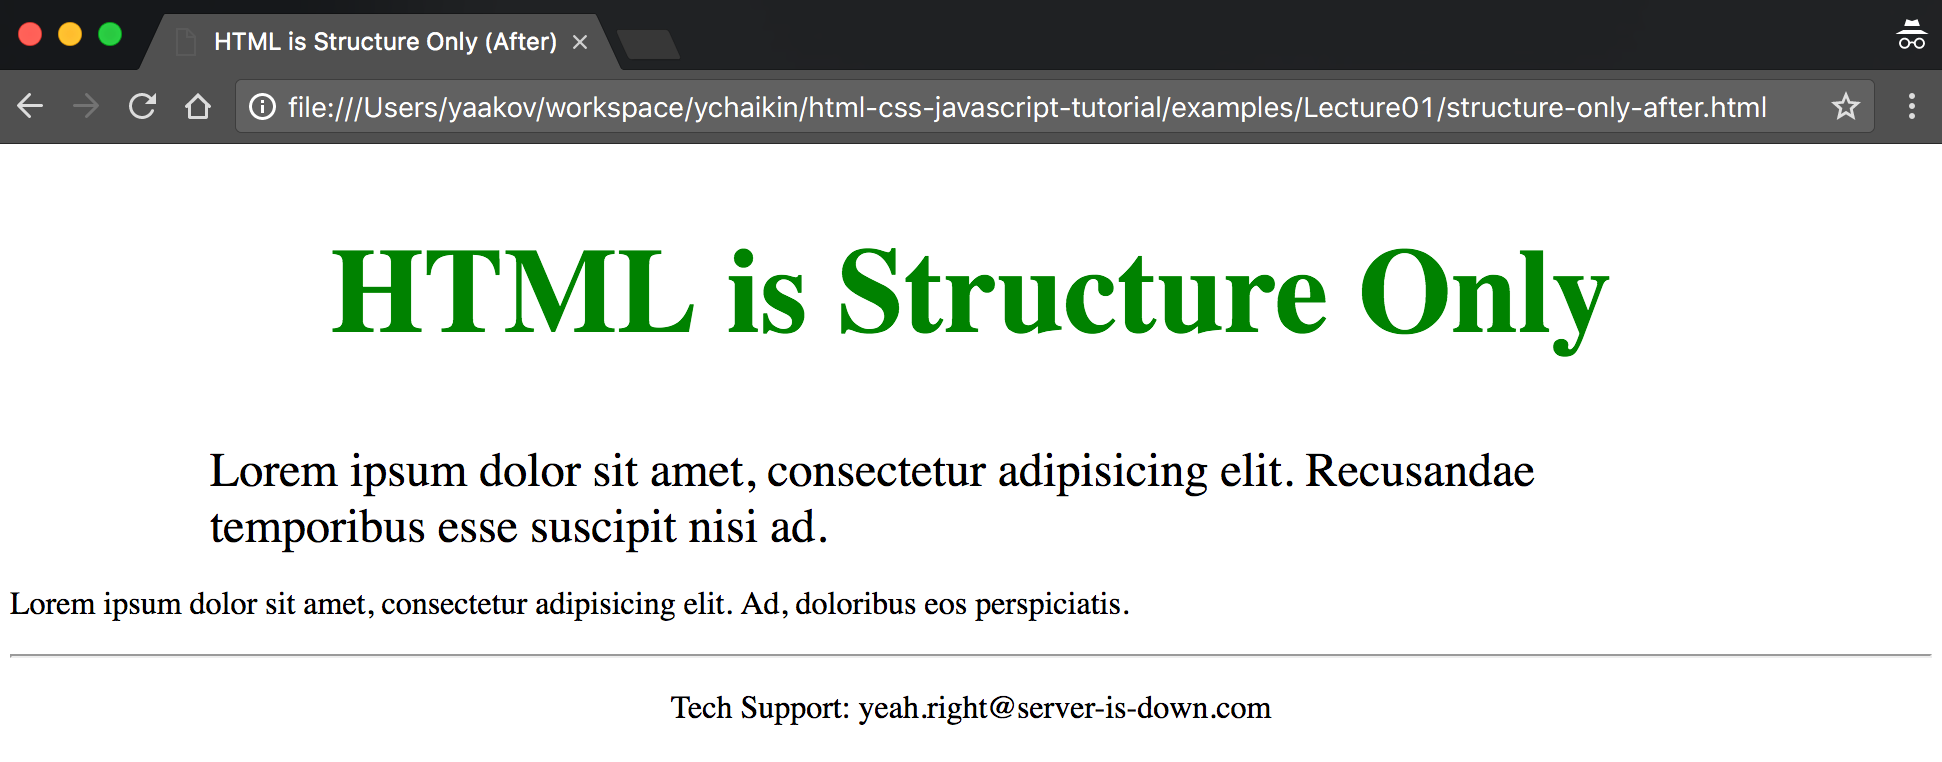 Screenshot of structure-only-after.html displayed in Chrome